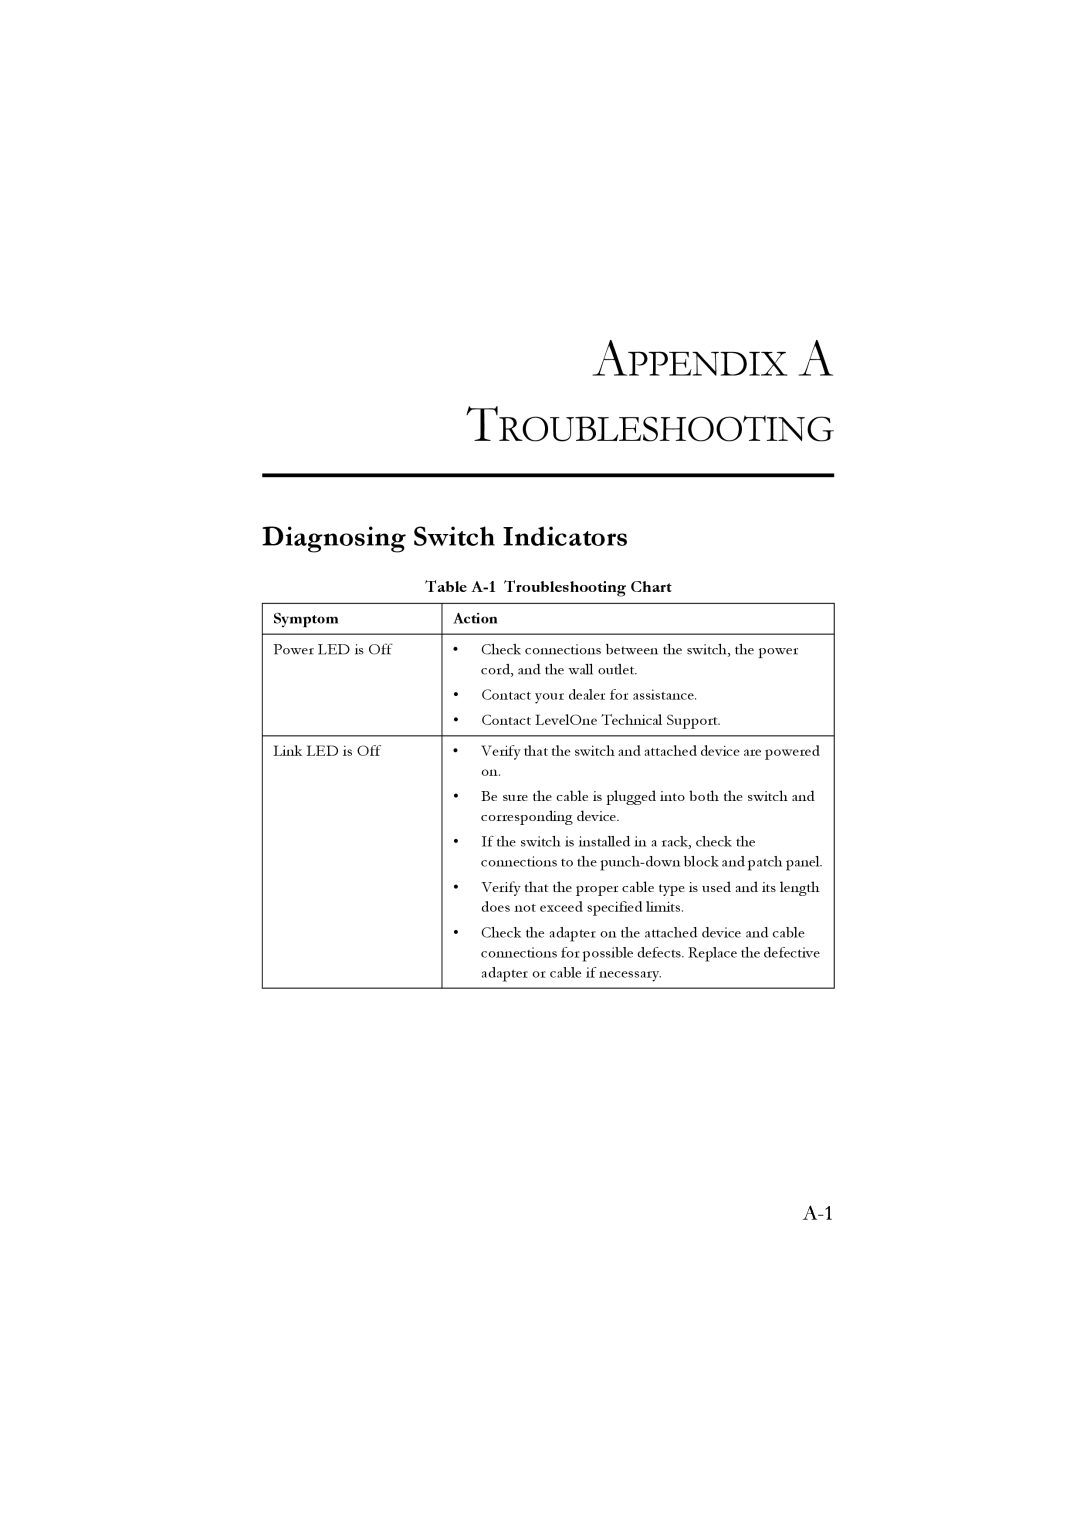 LevelOne GSW-2476 user manual Appendix A Troubleshooting, Diagnosing Switch Indicators, Table A-1 Troubleshooting Chart 